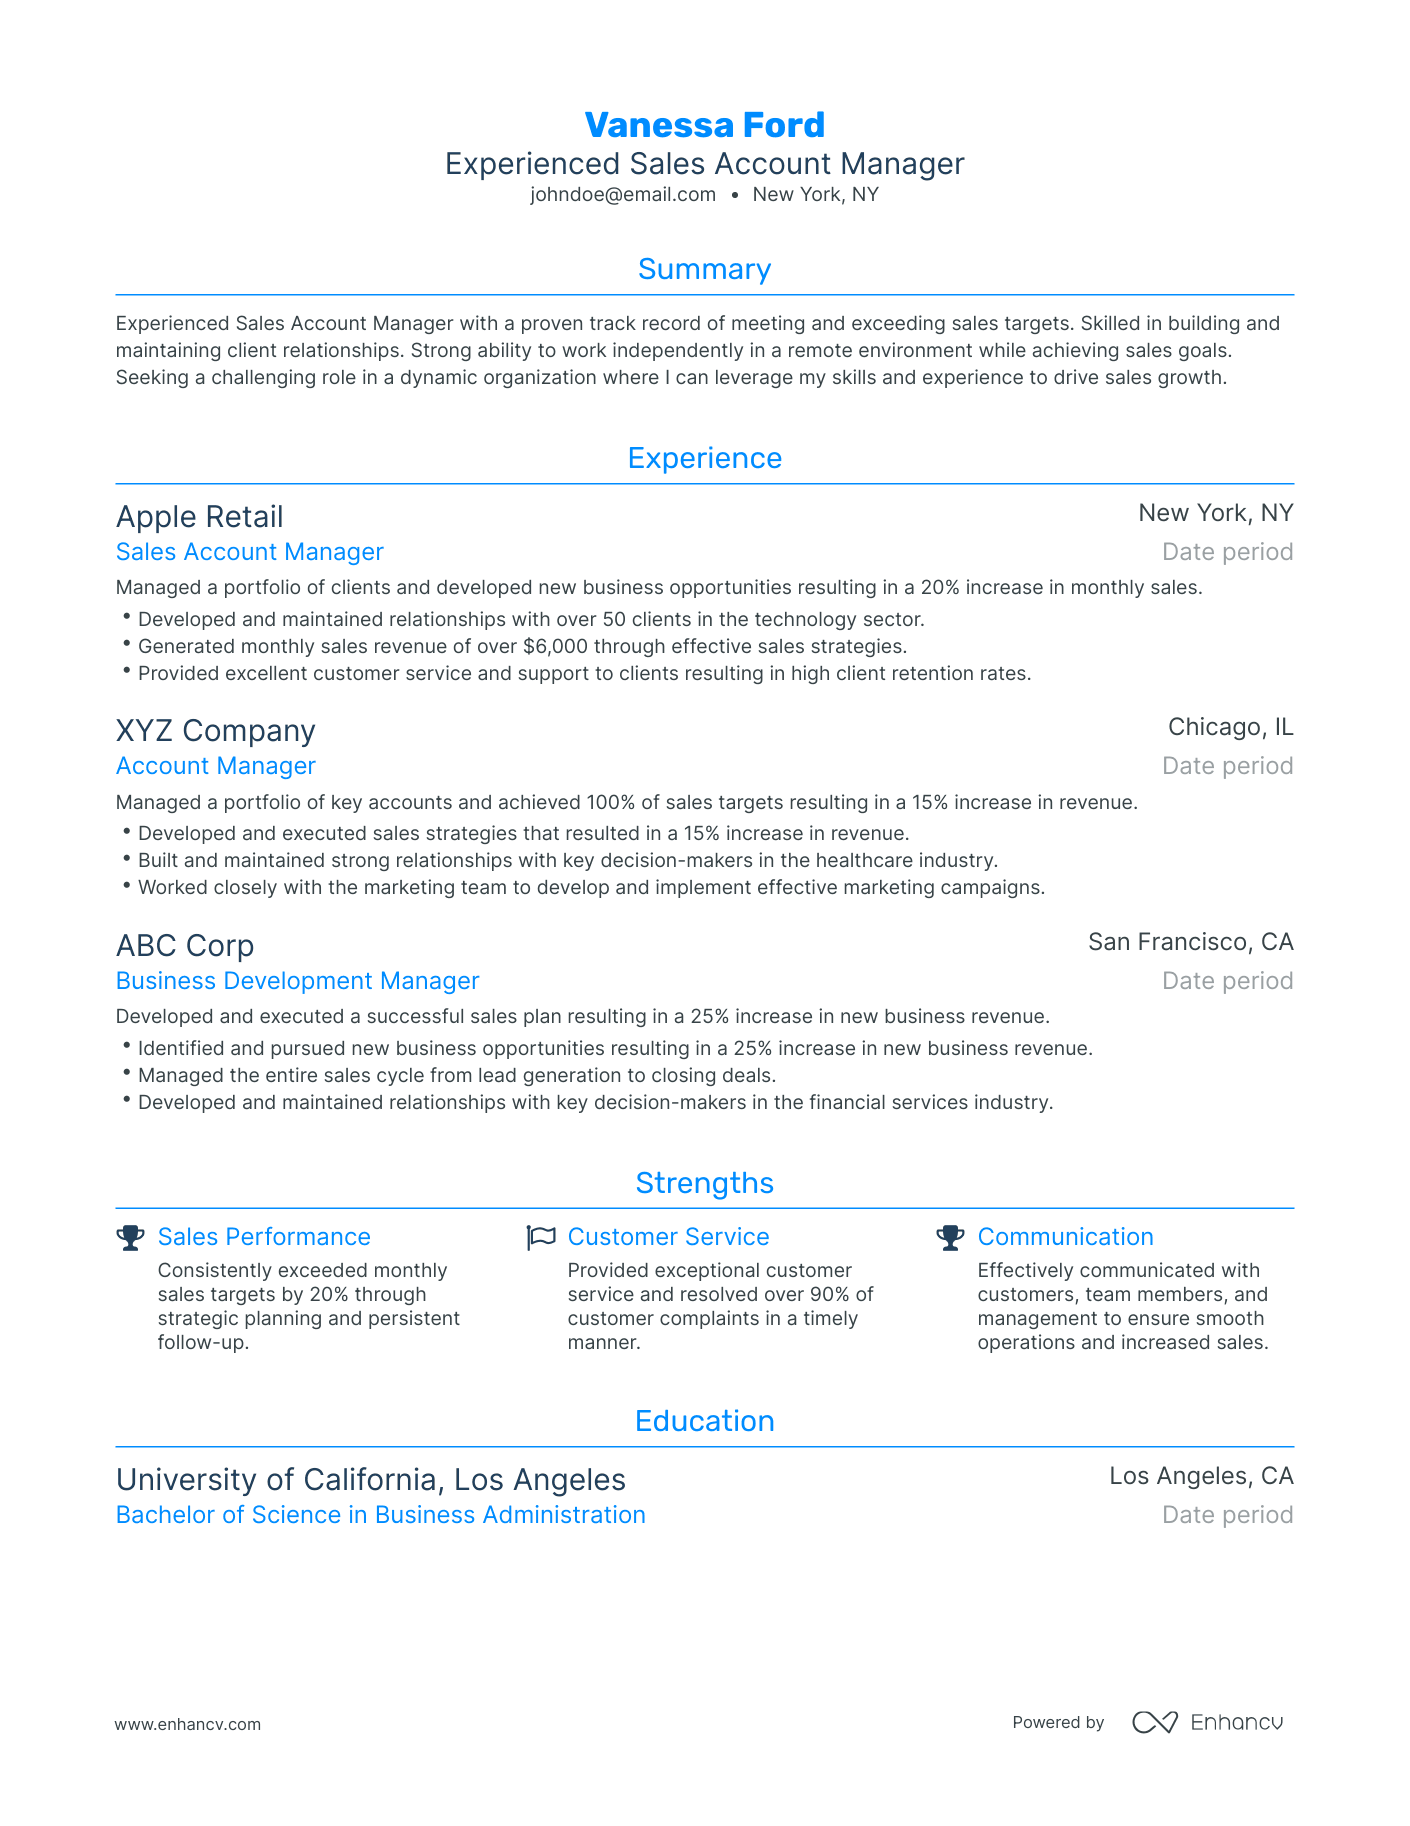 Traditional Apple Retail Resume Template